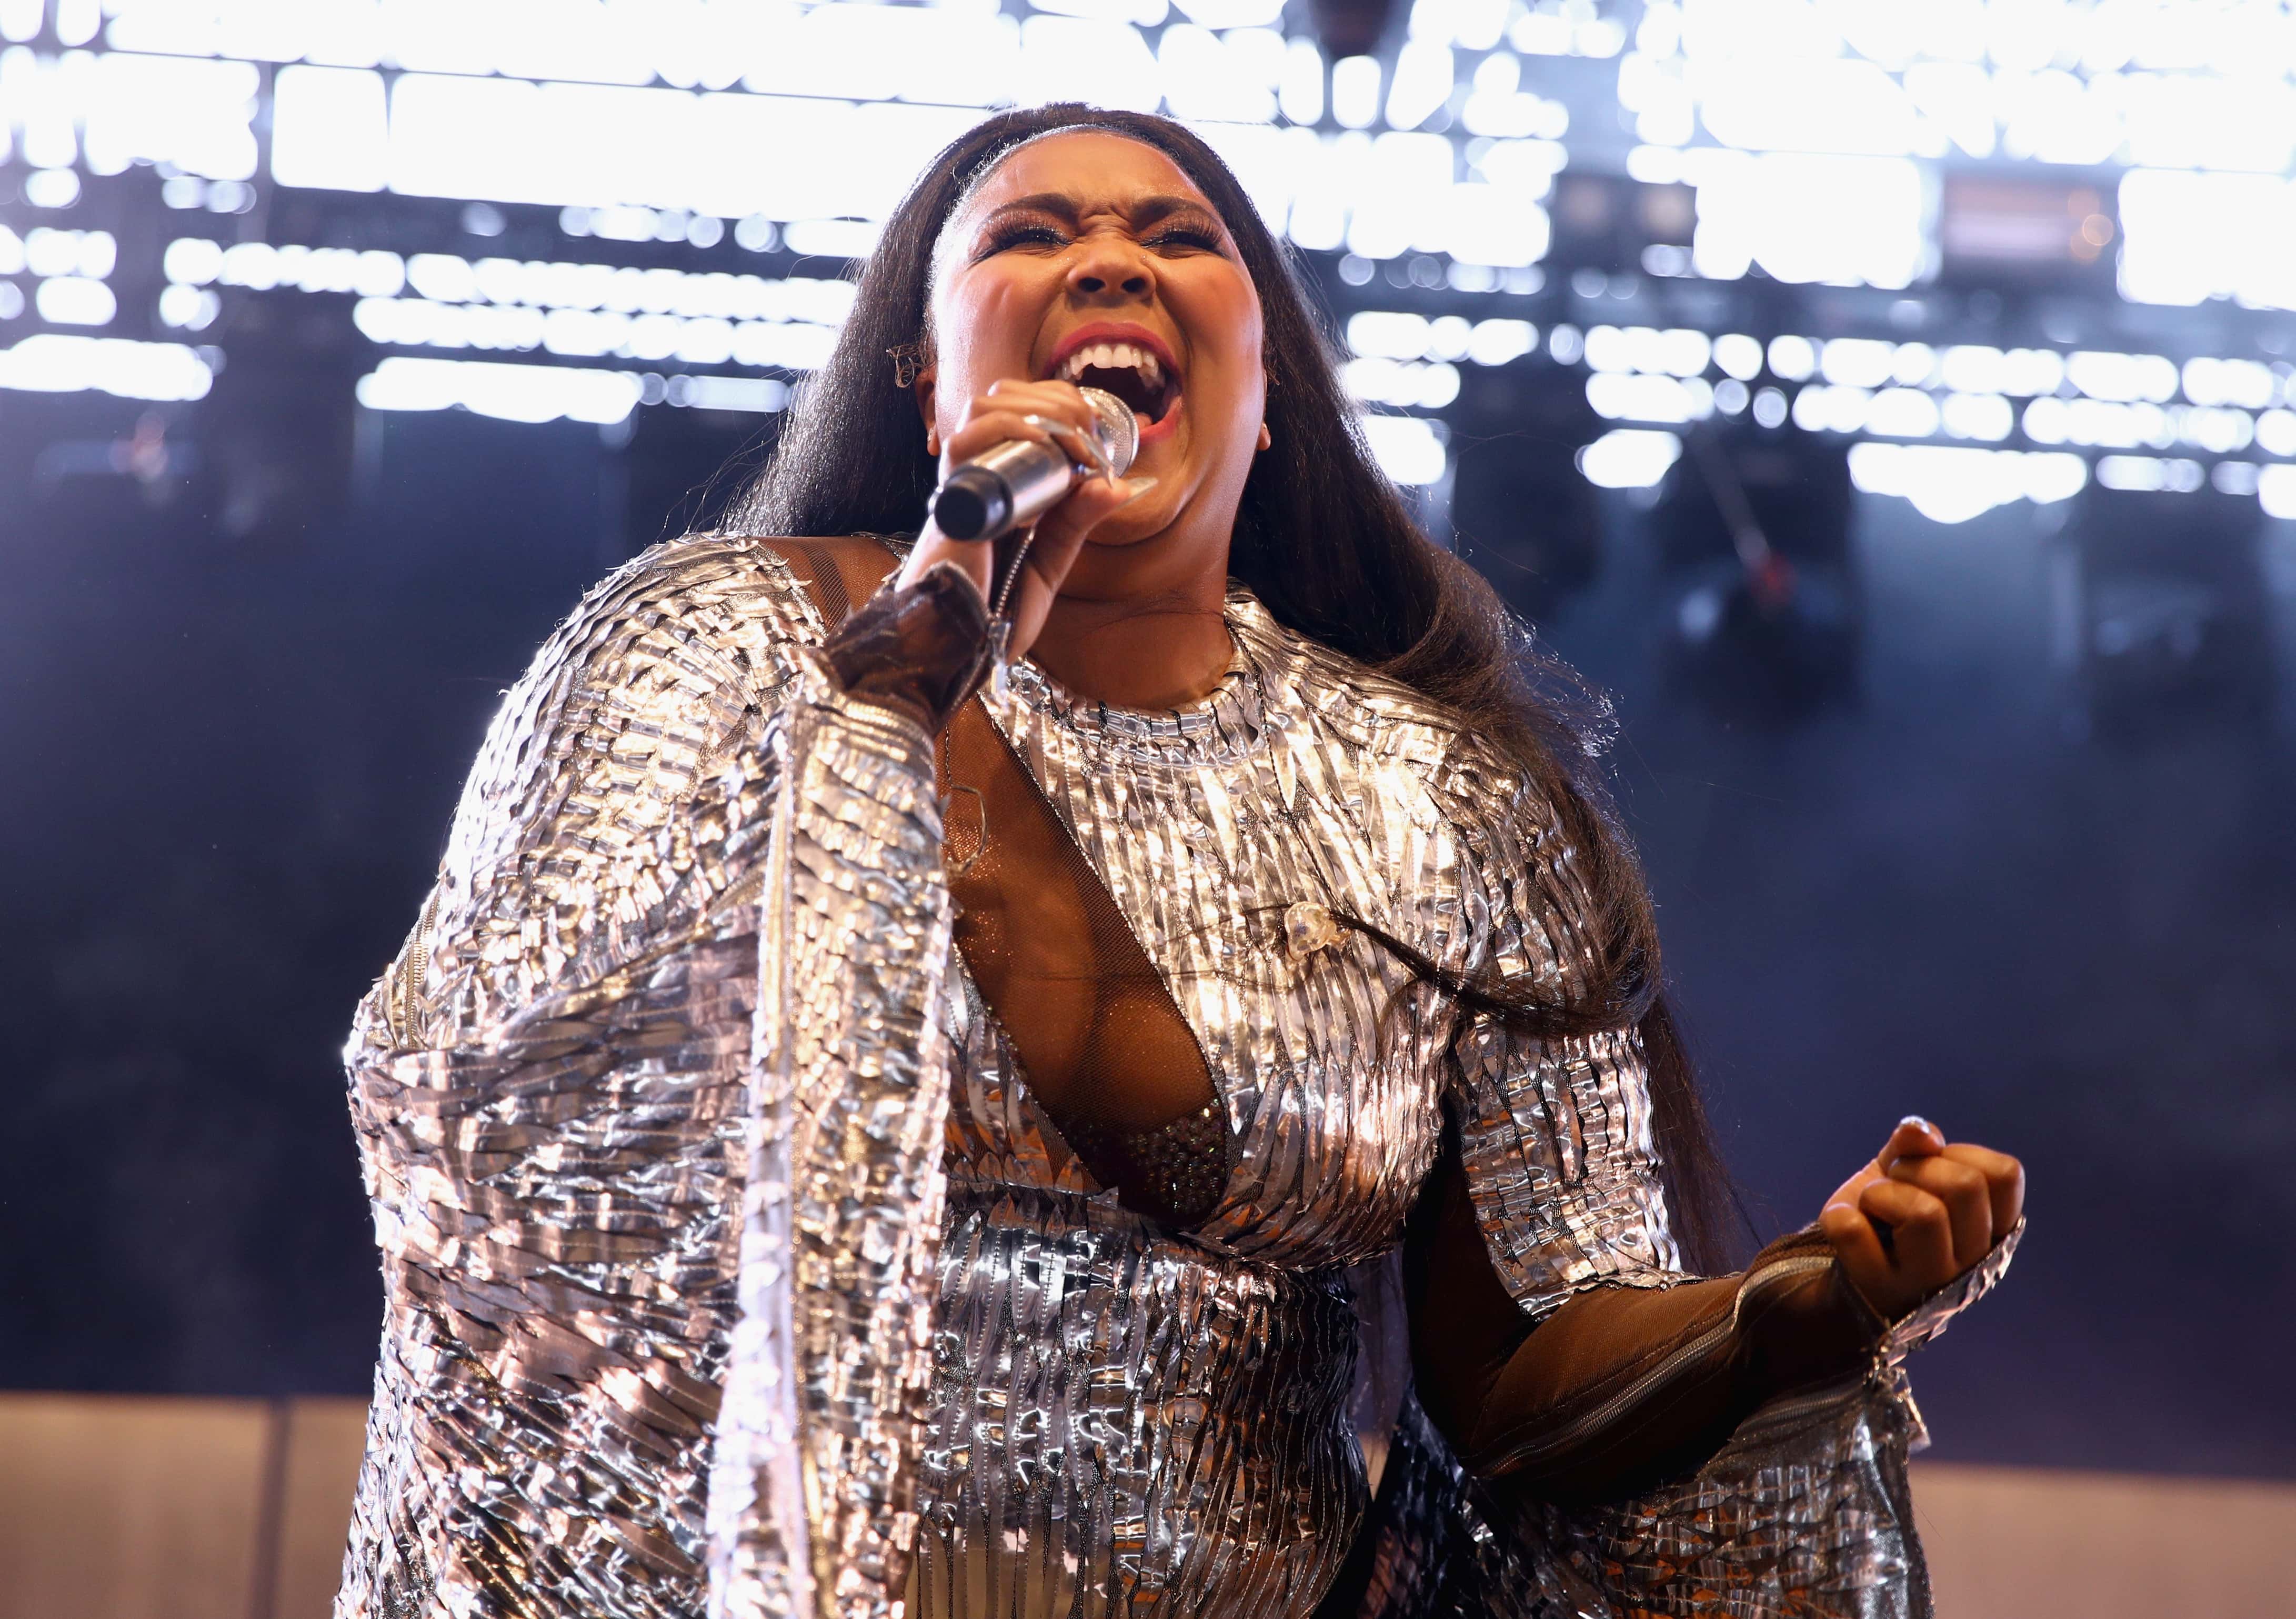 Lizzo: 12 facts about the 'Juice' singer and rapper you probably never knew